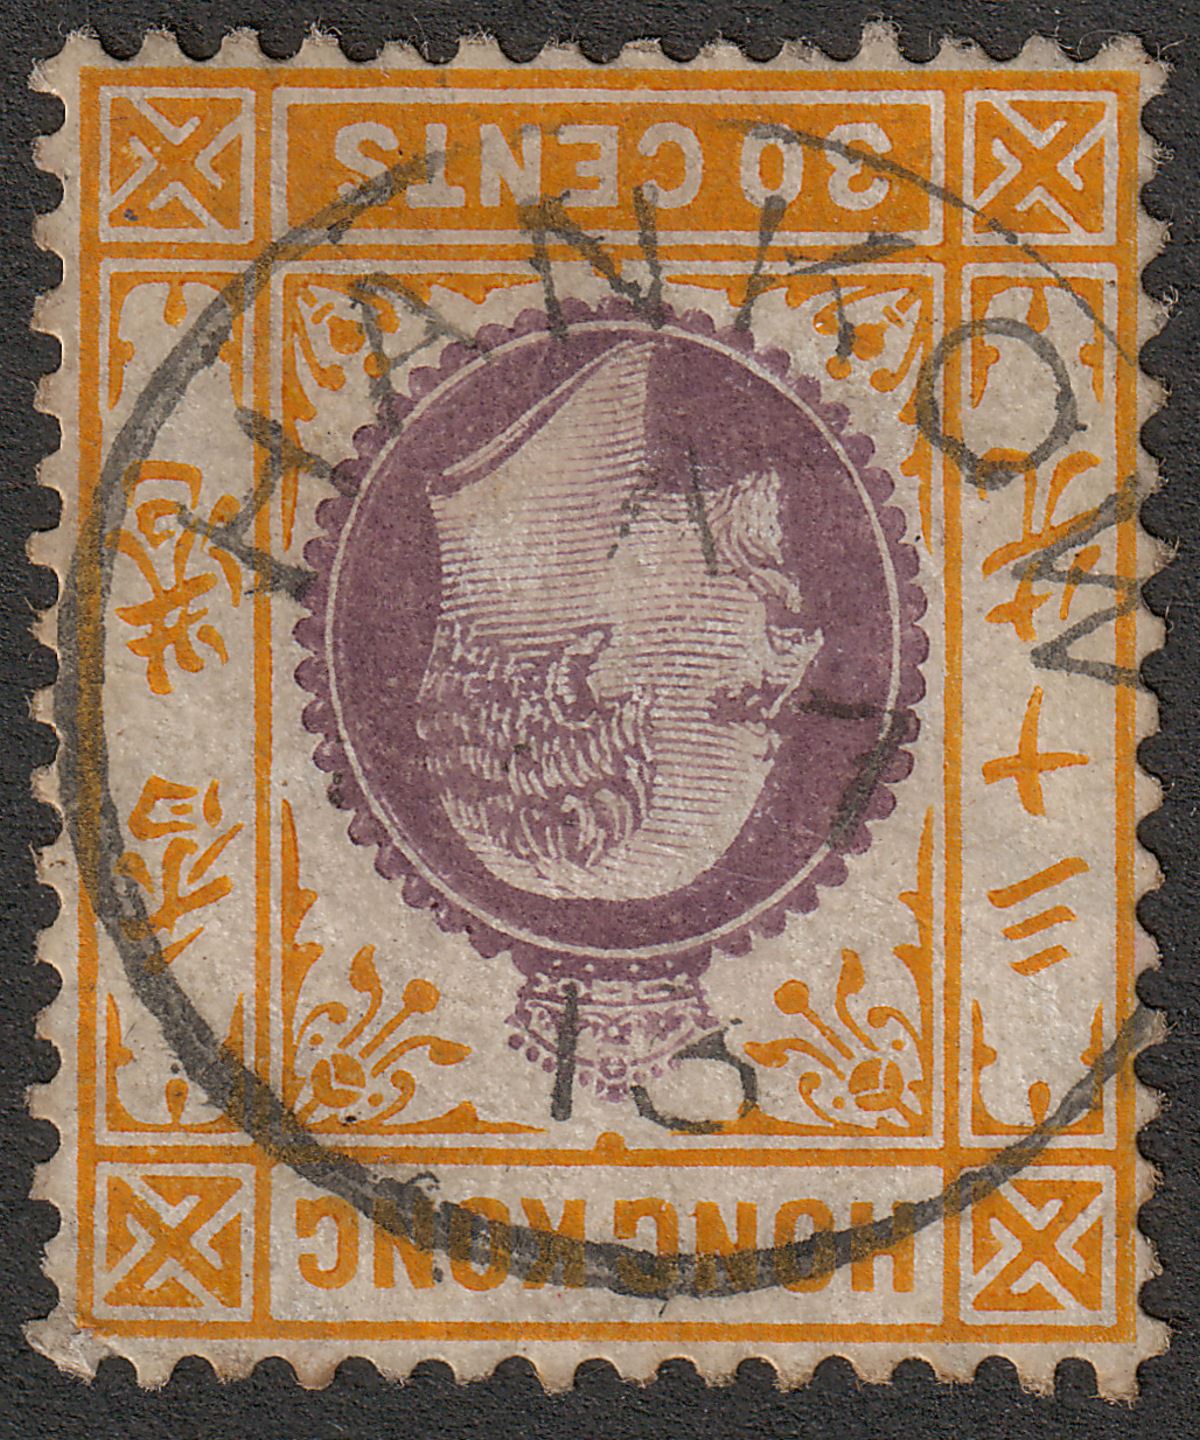 Hong Kong 1913 KEVII 30c Used with HANKOW code A postmark SG Z510 cat £100